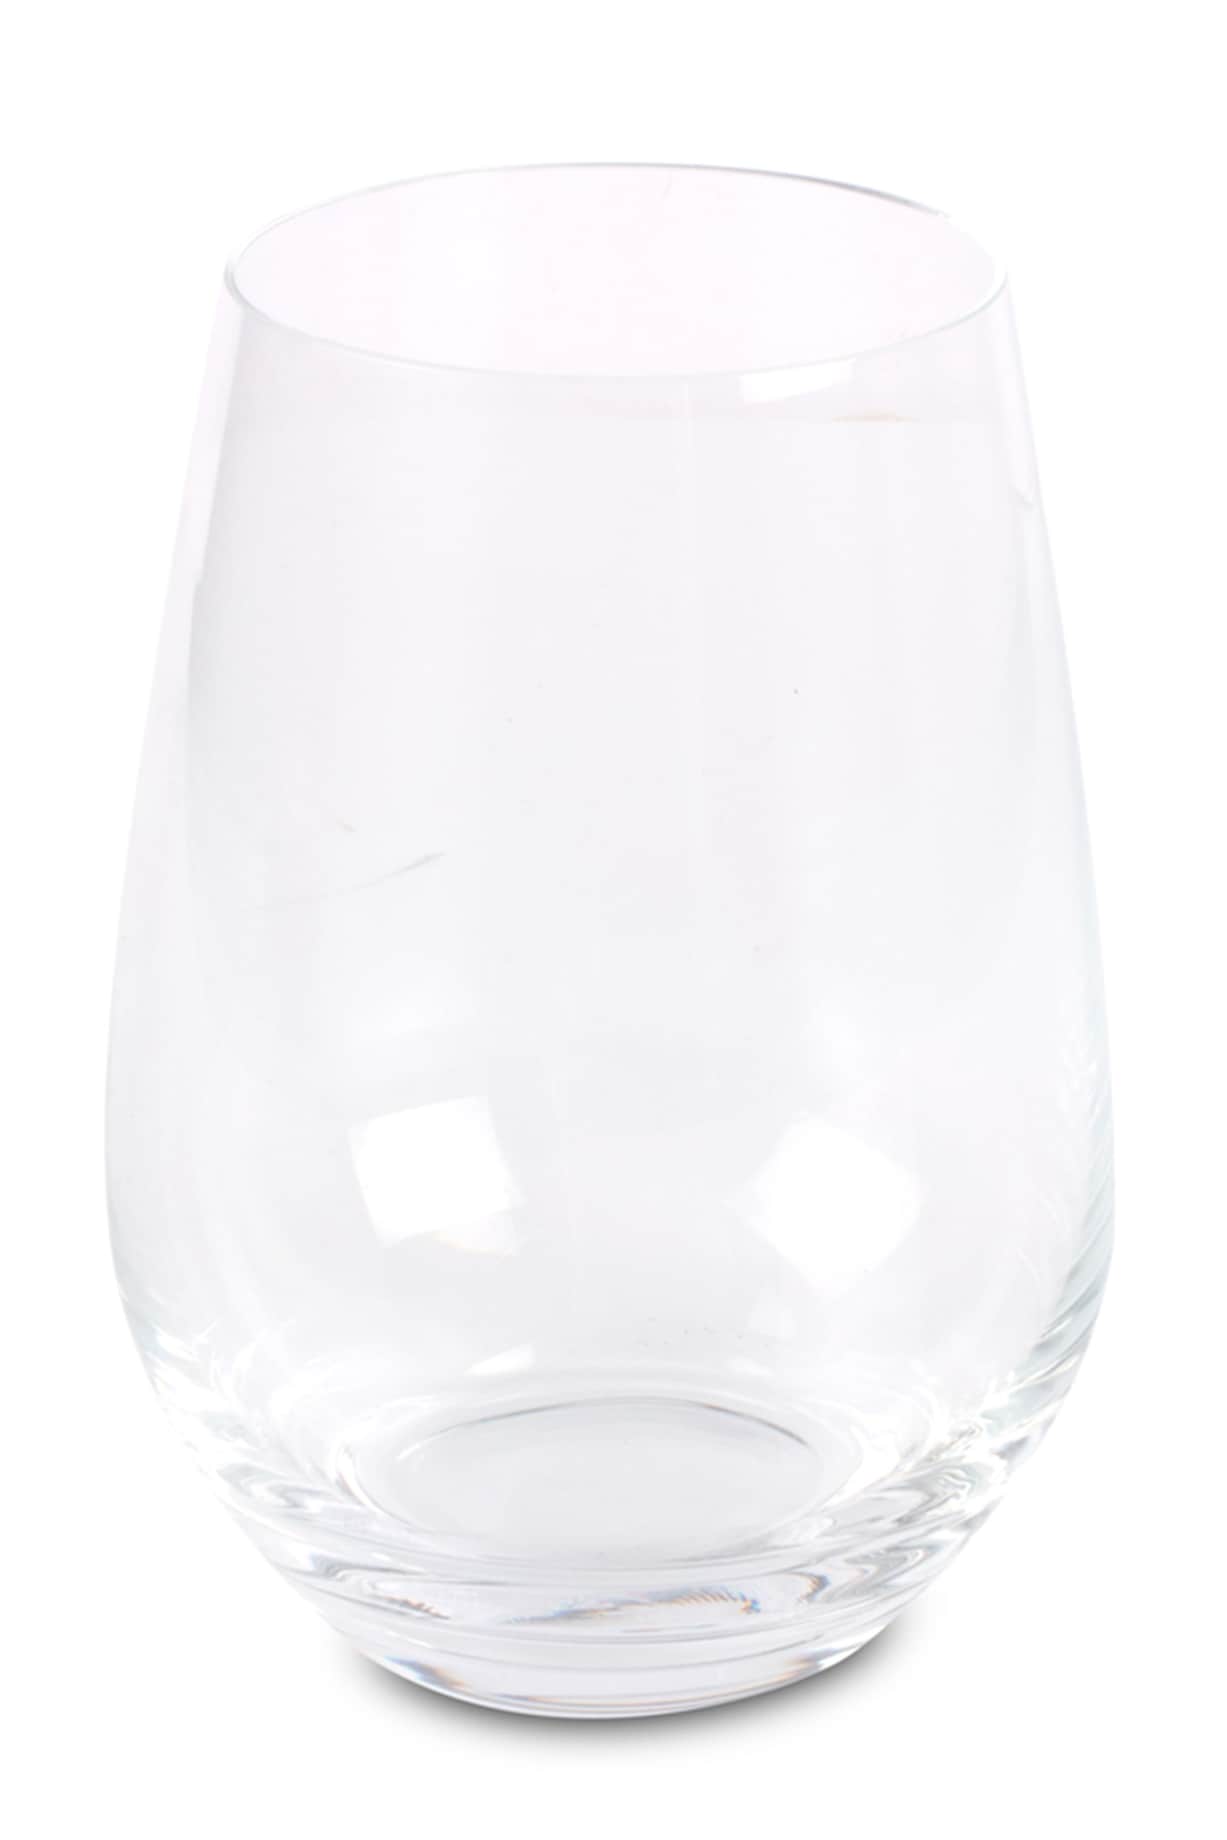 Alcohol You Later 15oz Stemless Crystal Wine Glass - Day Drinking Sunday  Brunch or Funny Girls Night…See more Alcohol You Later 15oz Stemless  Crystal